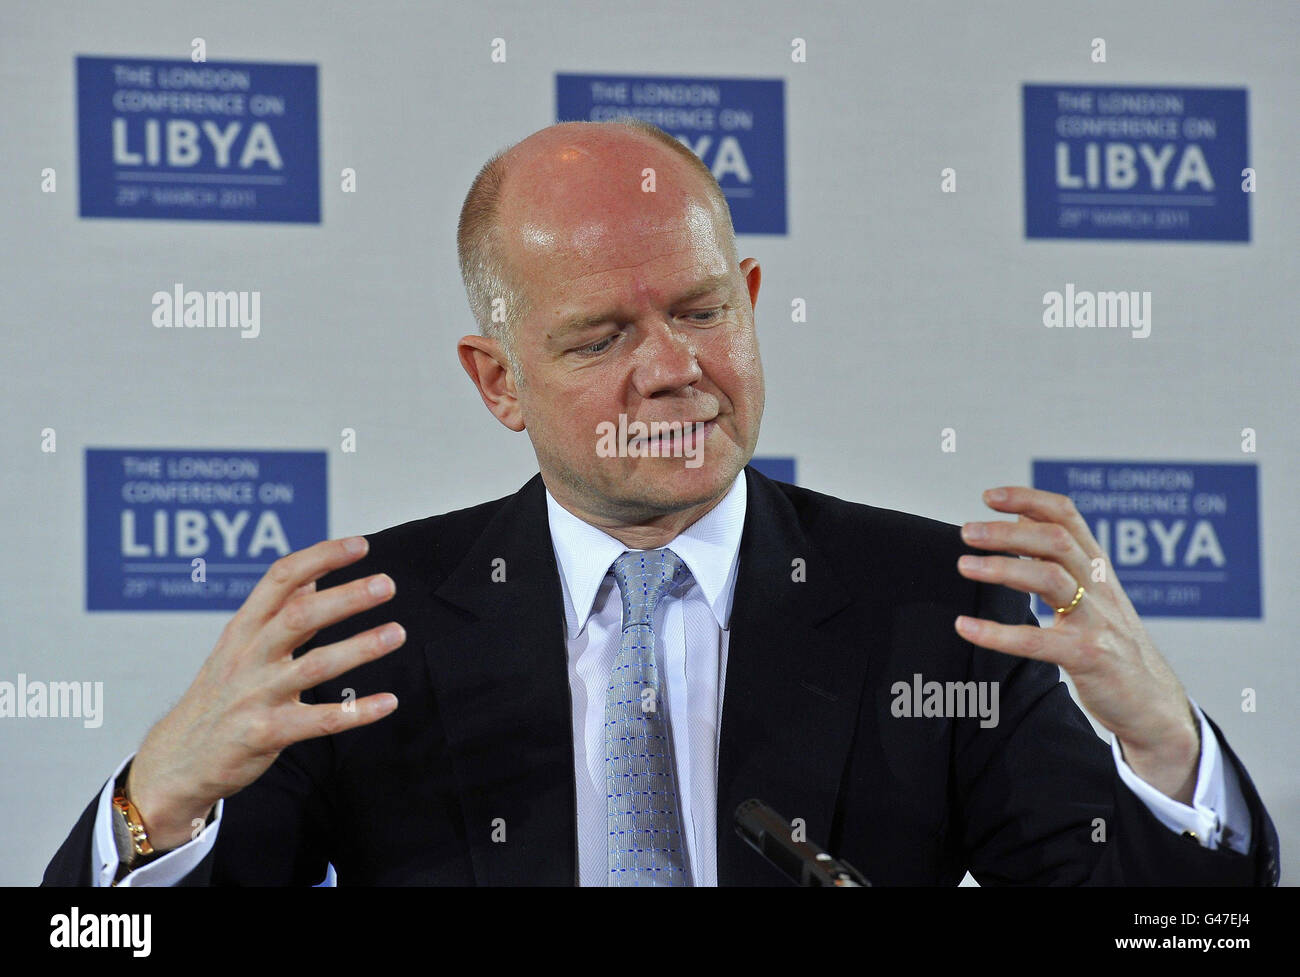 Foreign Secretary William Hague speaks during a news conference after the Libya Conference at the Foreign & Commonwealth Office in London. Stock Photo